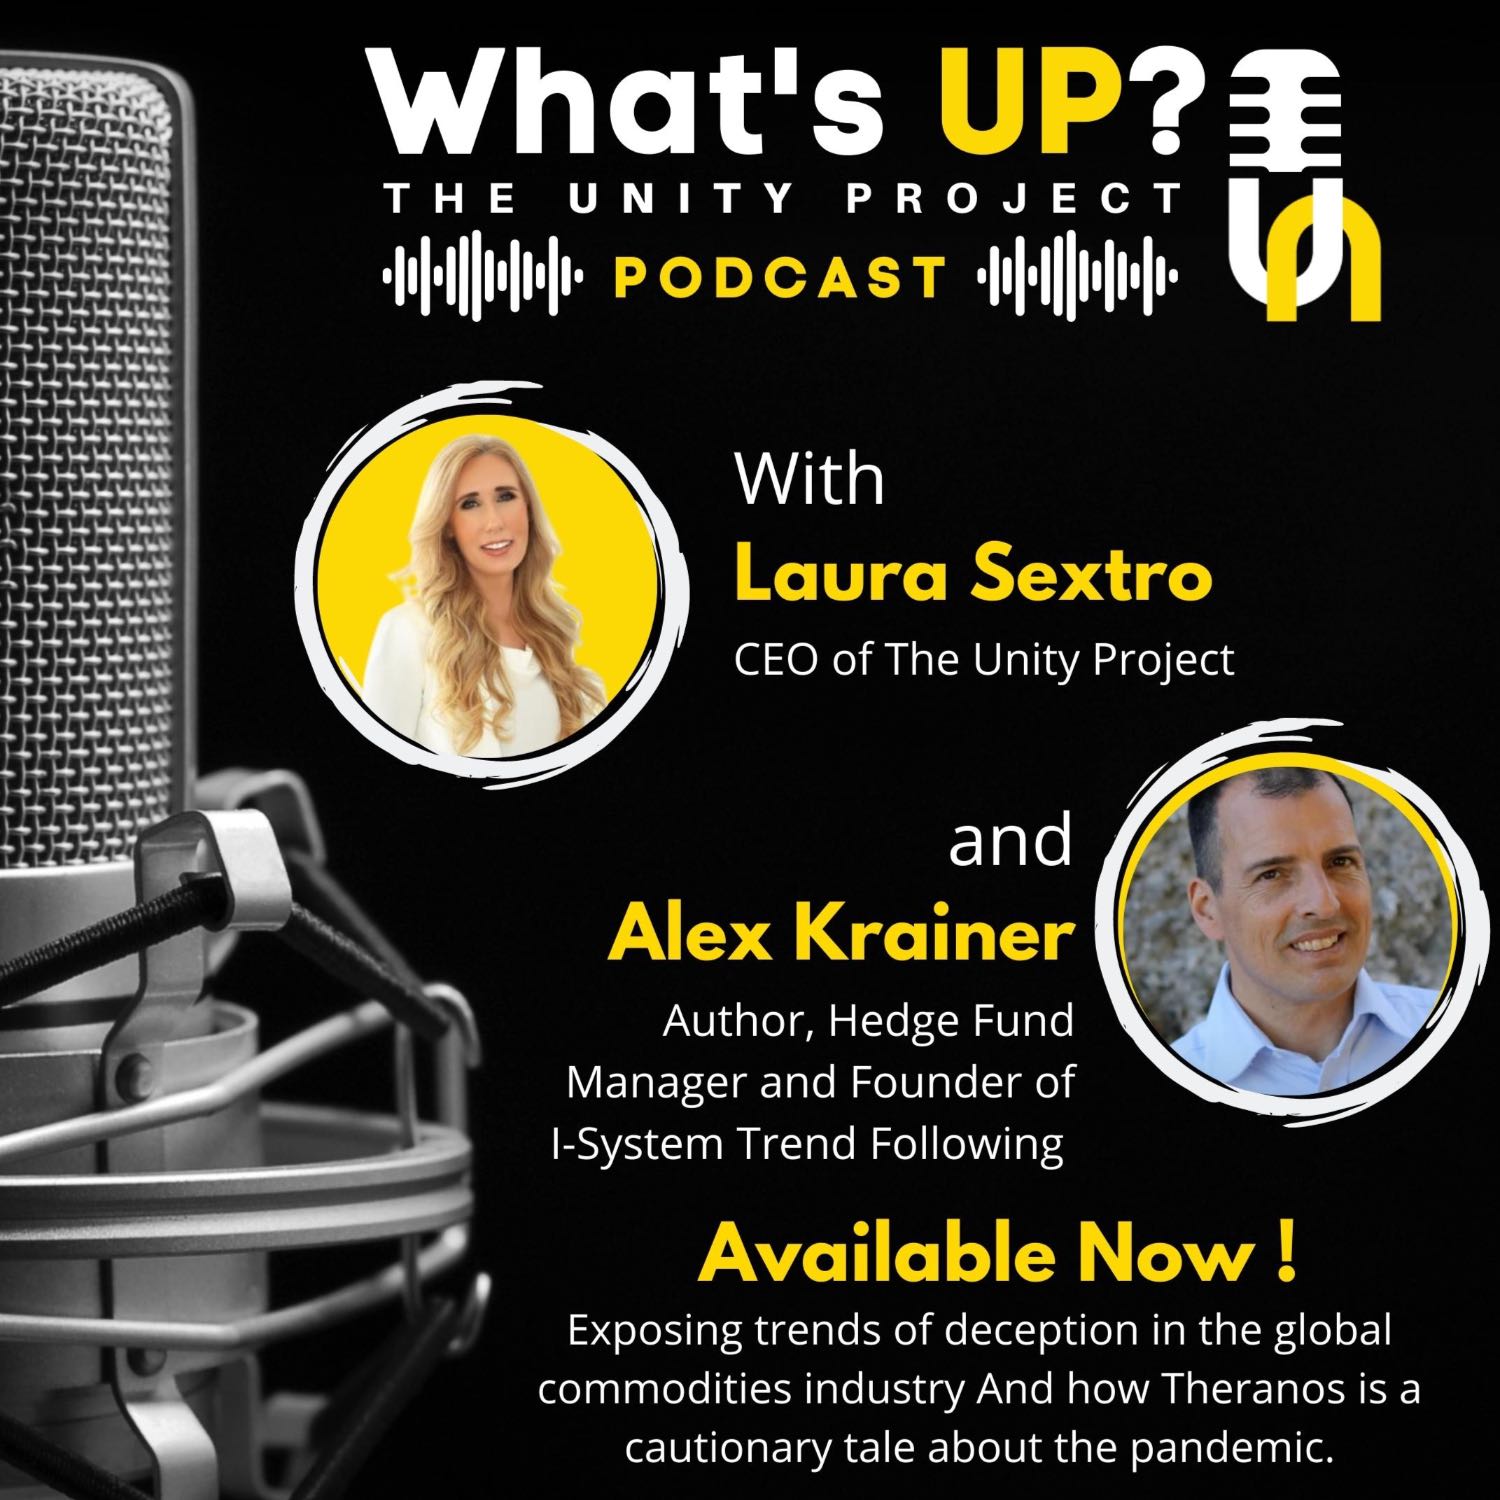 Ep. 12: Unity Project Podcast w/ Alex Krainer: Exposing Trends of Deception in the Global Commodities Industry and How Theranos is a Cautionary Tale About the Pandemic